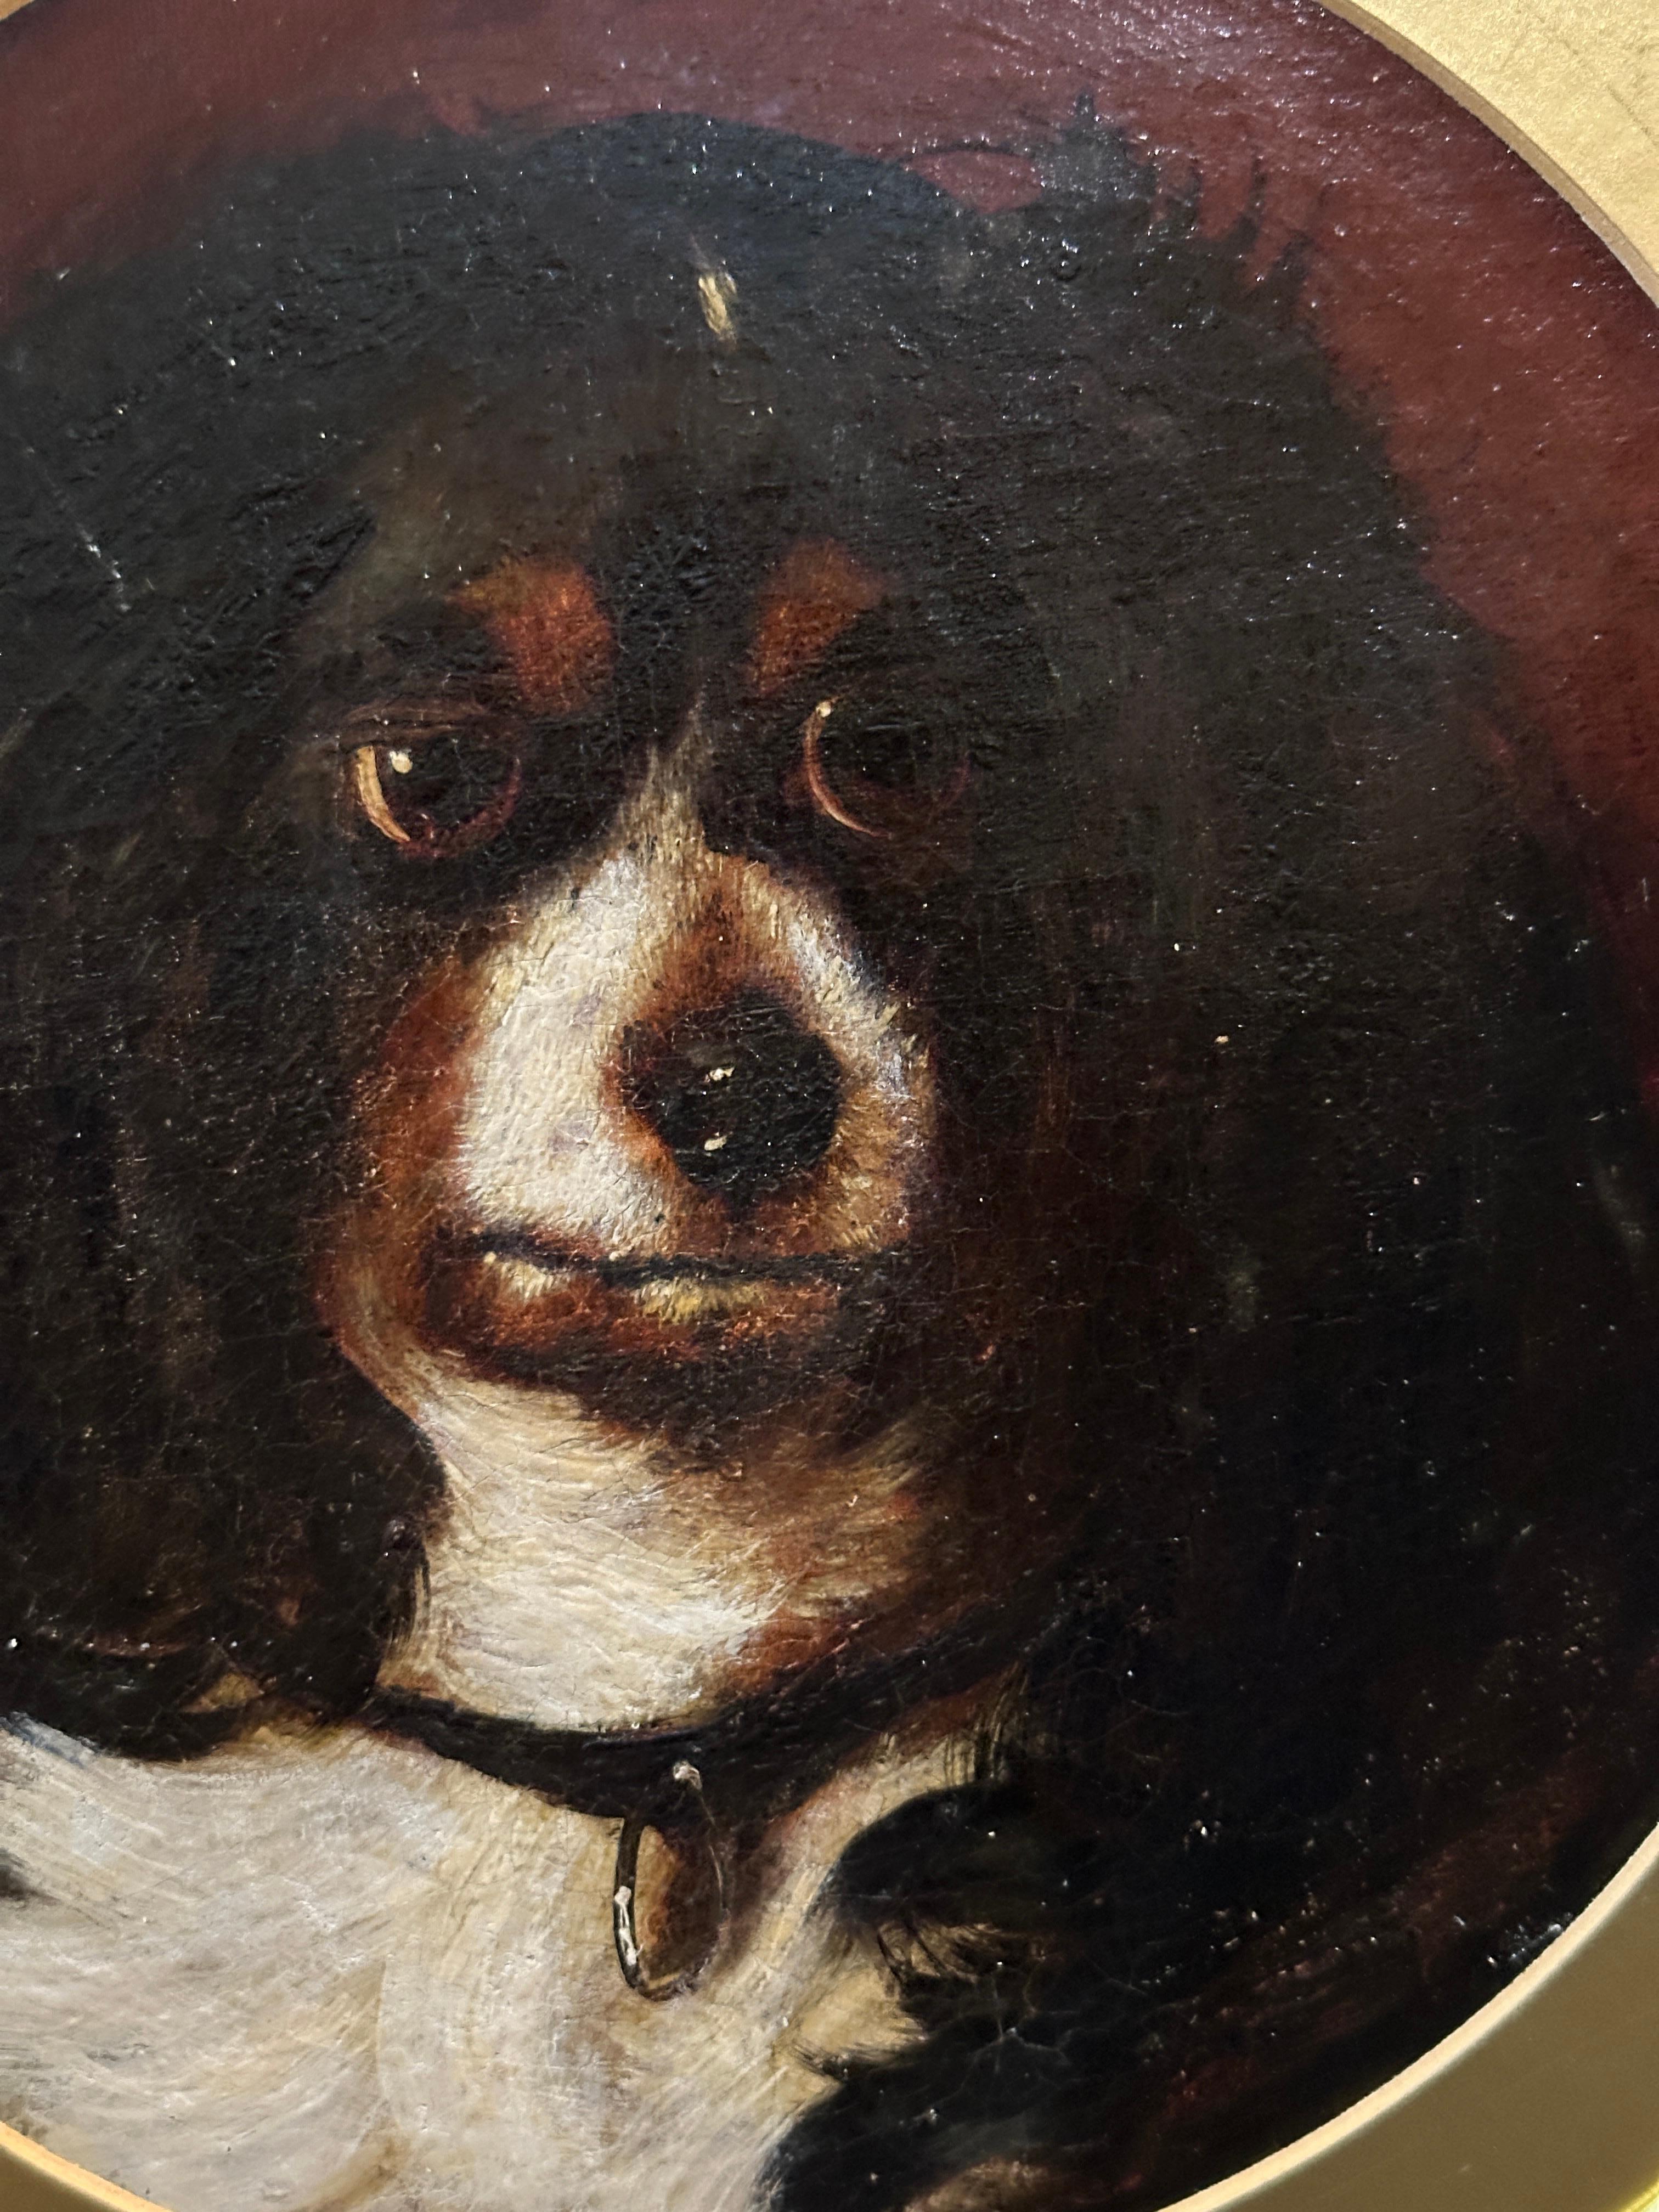 King Charles Cavalier Spaniel, 19th century English portrait of a dogs head - Painting by George Earl